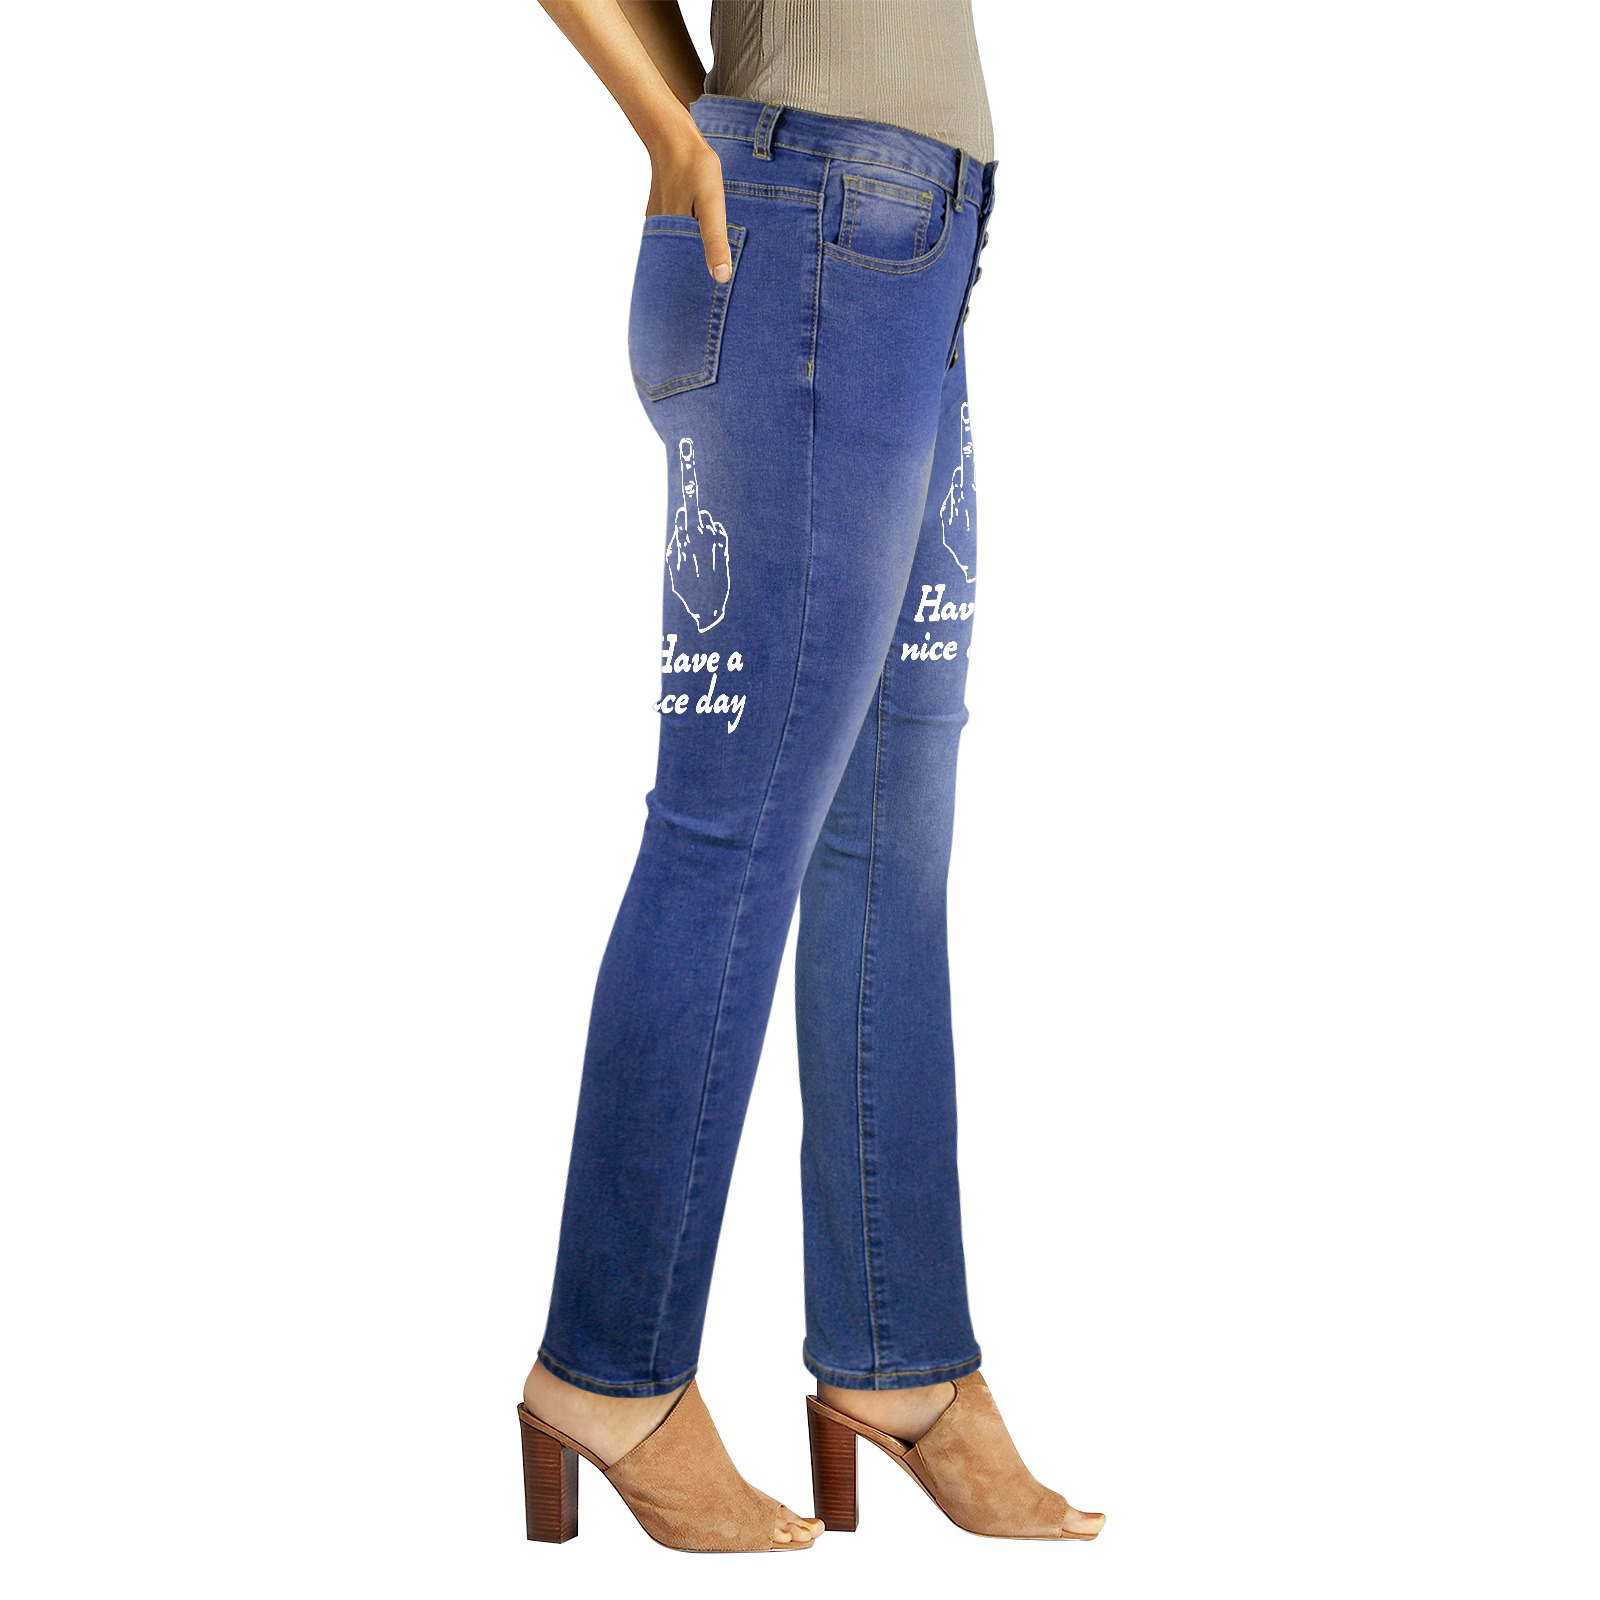 Adult humor. Have a nice day and middle finger. Women's Jeans (Front&Back Printing)